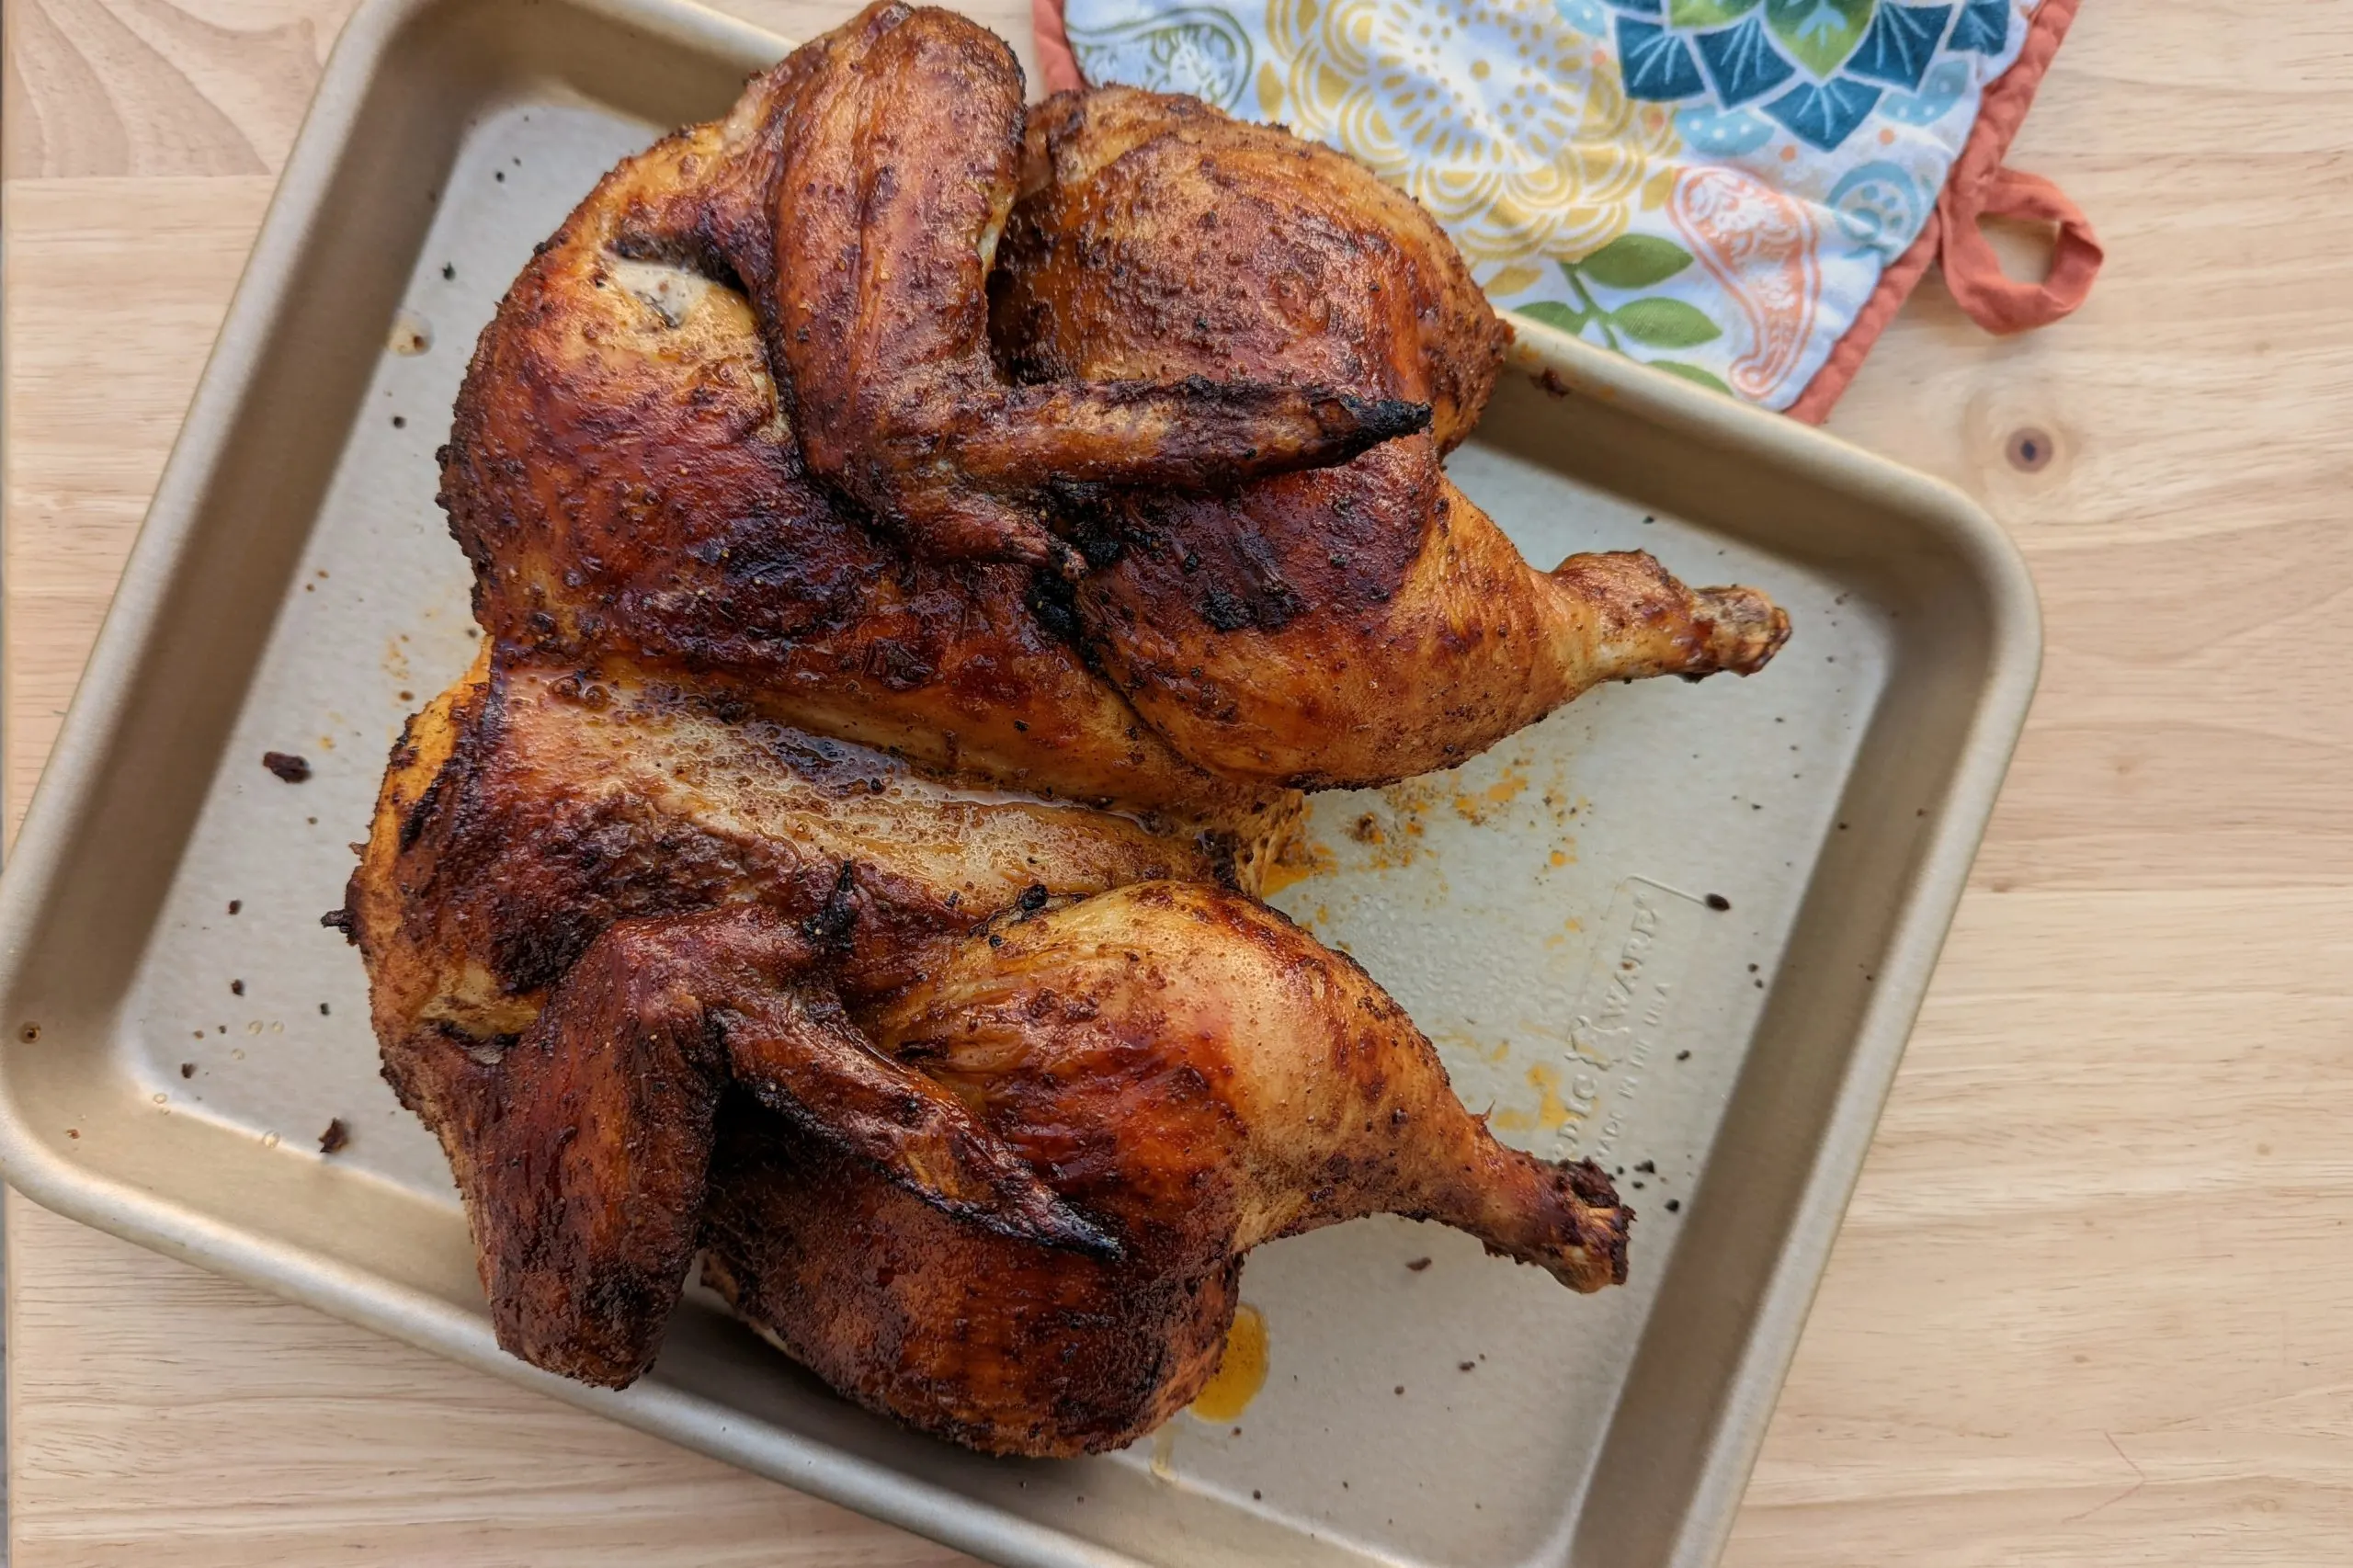 A whole roasted Peruvian chicken ready to serv.